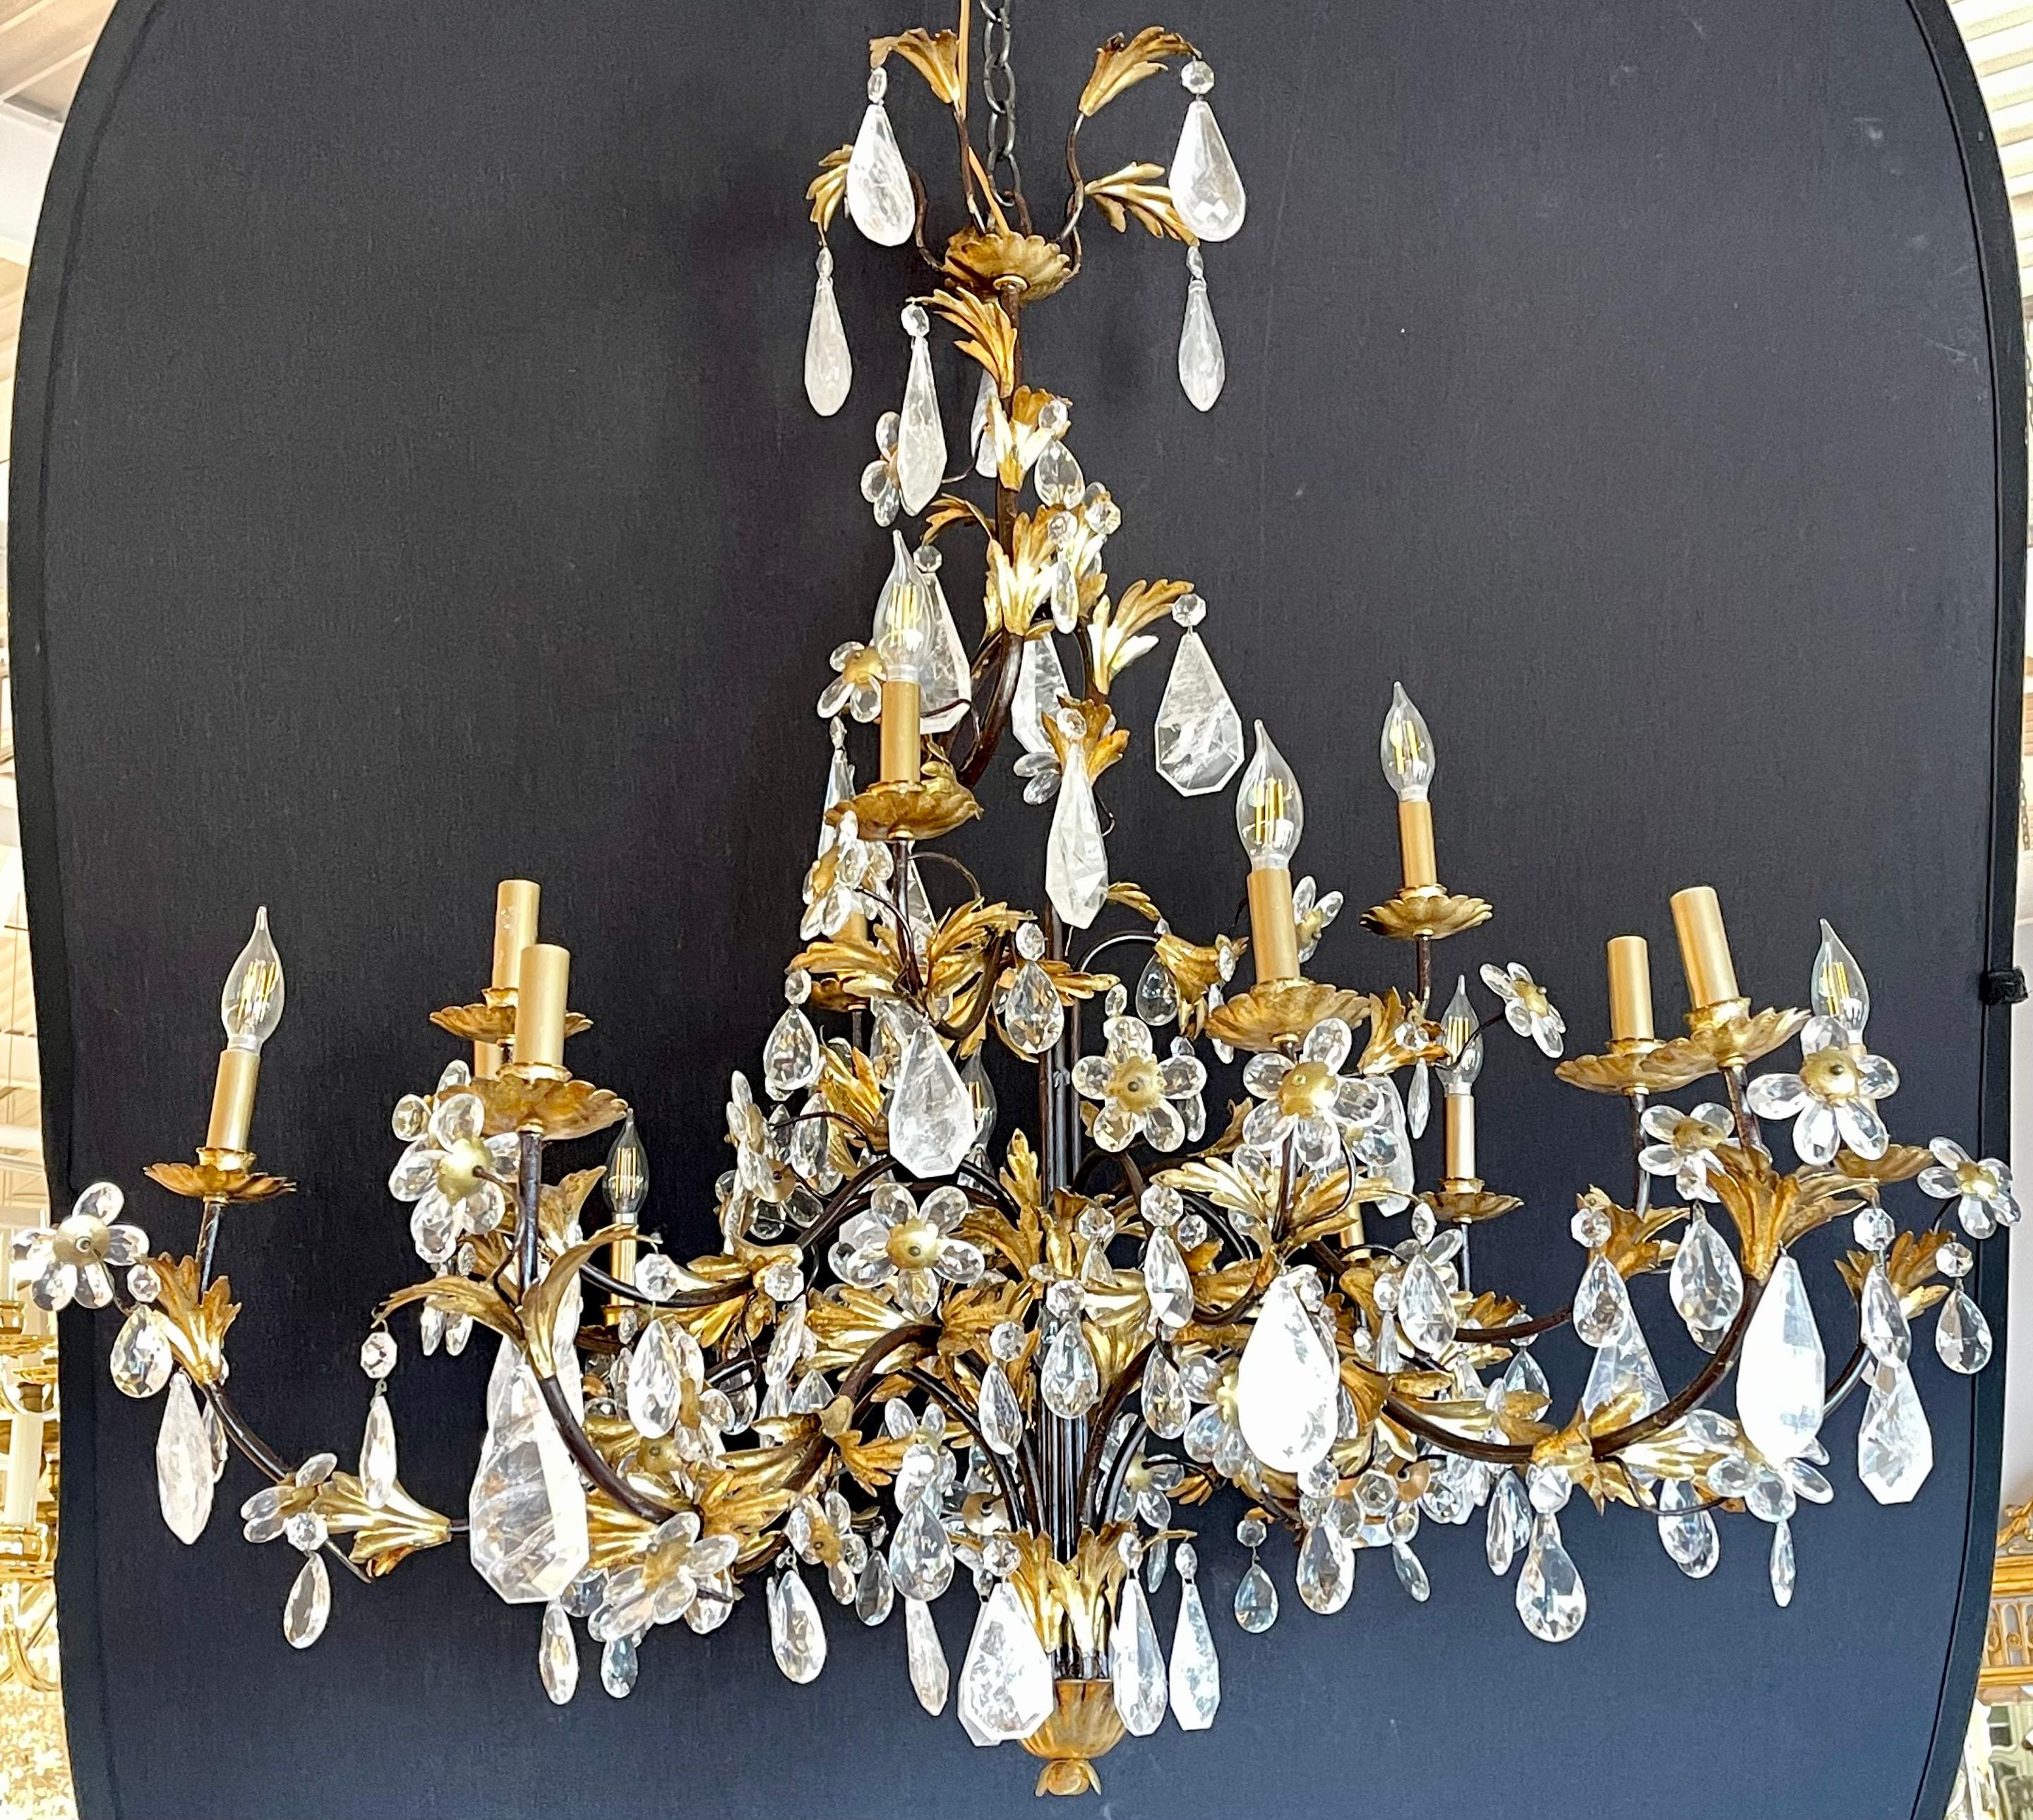 A Hollywood Regency or Louis XVI Style chandelier having many large and impressive rock crystals prisms hanging from an ebony and gilt metal frame of floral, swag and large crystal roses. This finely craft stunning chandelier is not served well by